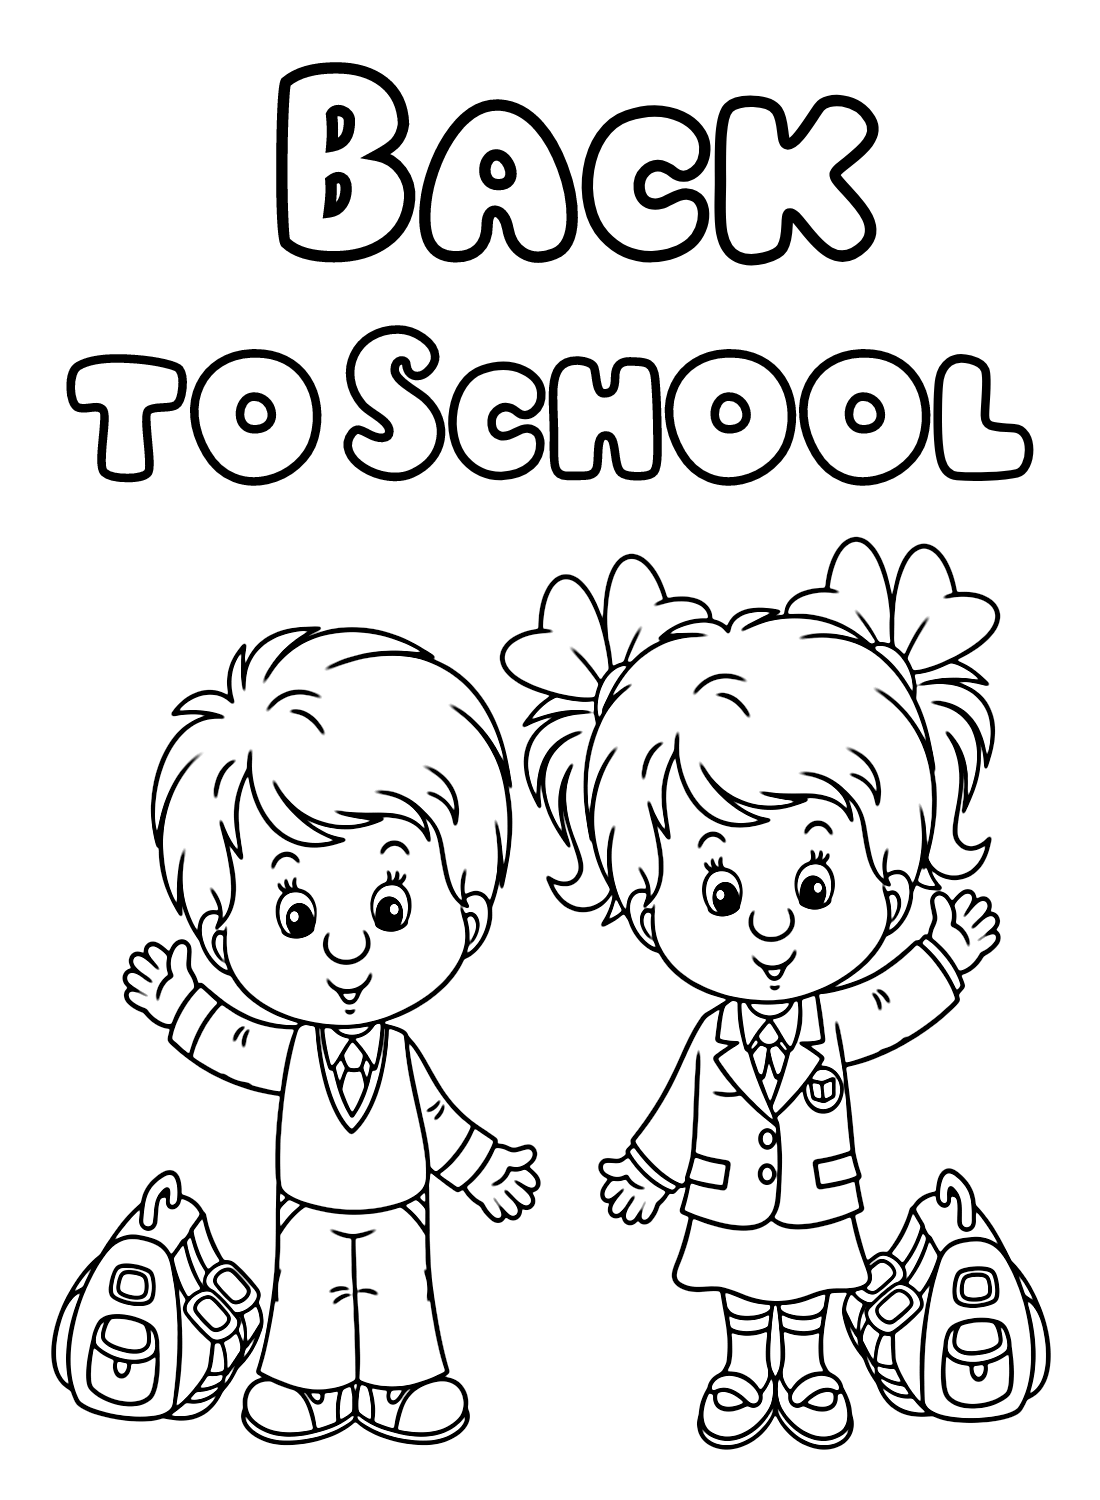 printable-back-to-school-coloring-back-to-school-coloring-pages